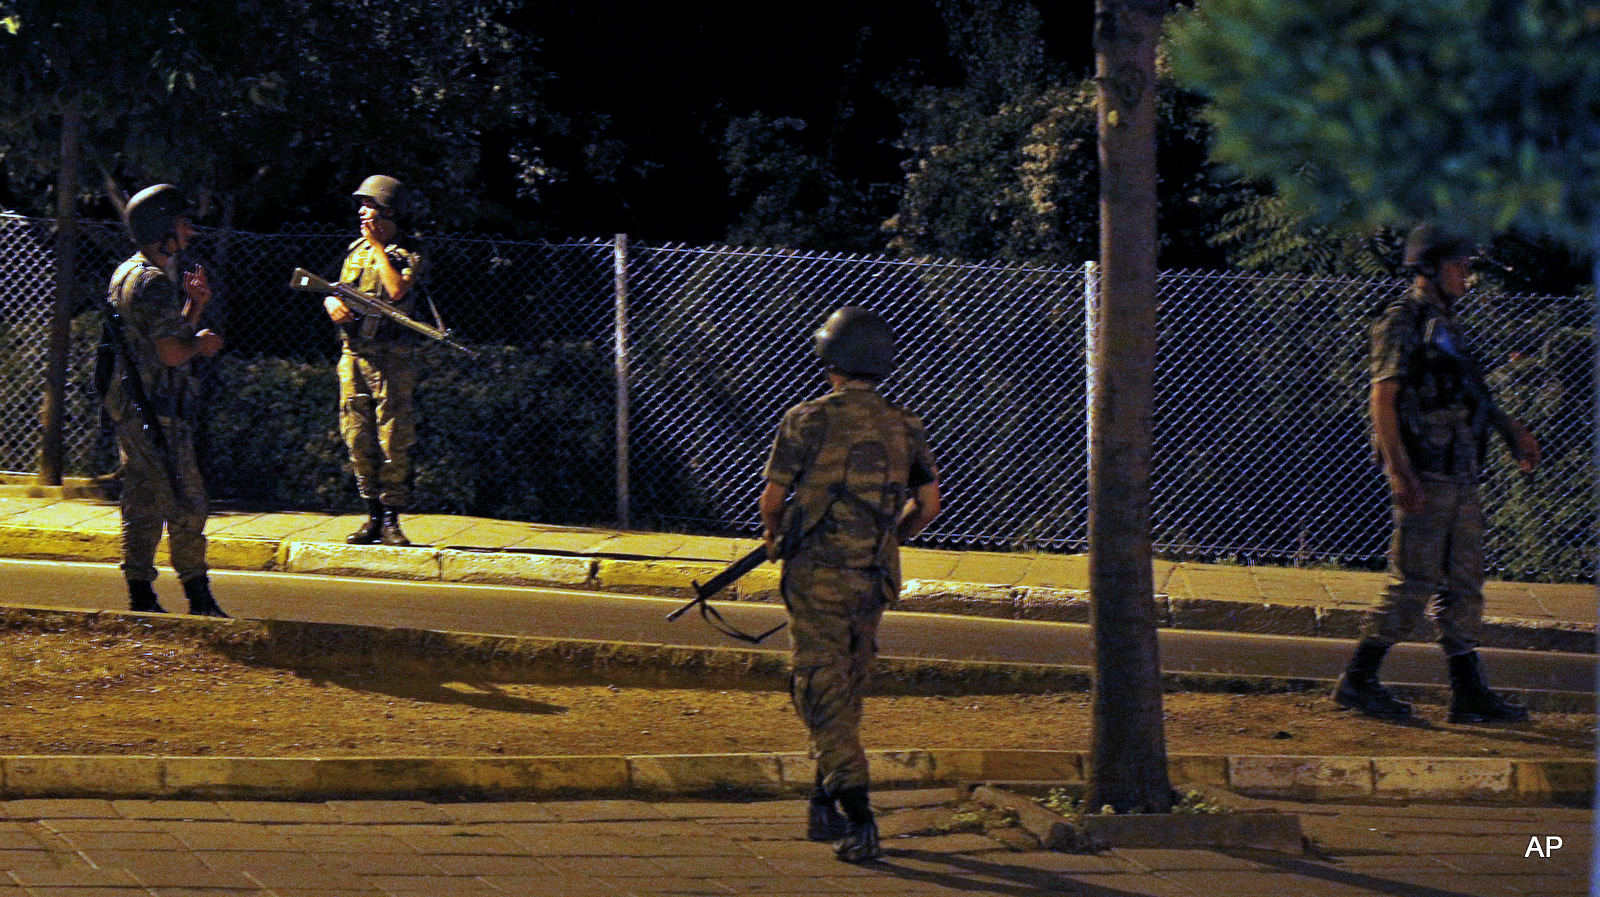 Turkish soldiers are seen on the Asian side of Istanbul, Friday, July 15, 2016. A group within Turkey's military has engaged in what appeared to be an attempted coup, the prime minister said, with military jets flying over the capital and reports of vehicles blocking two major bridges in Istanbul. Prime Minister Binali Yildirim told NTV television: "it is correct that there was an attempt," when asked if there was a coup.